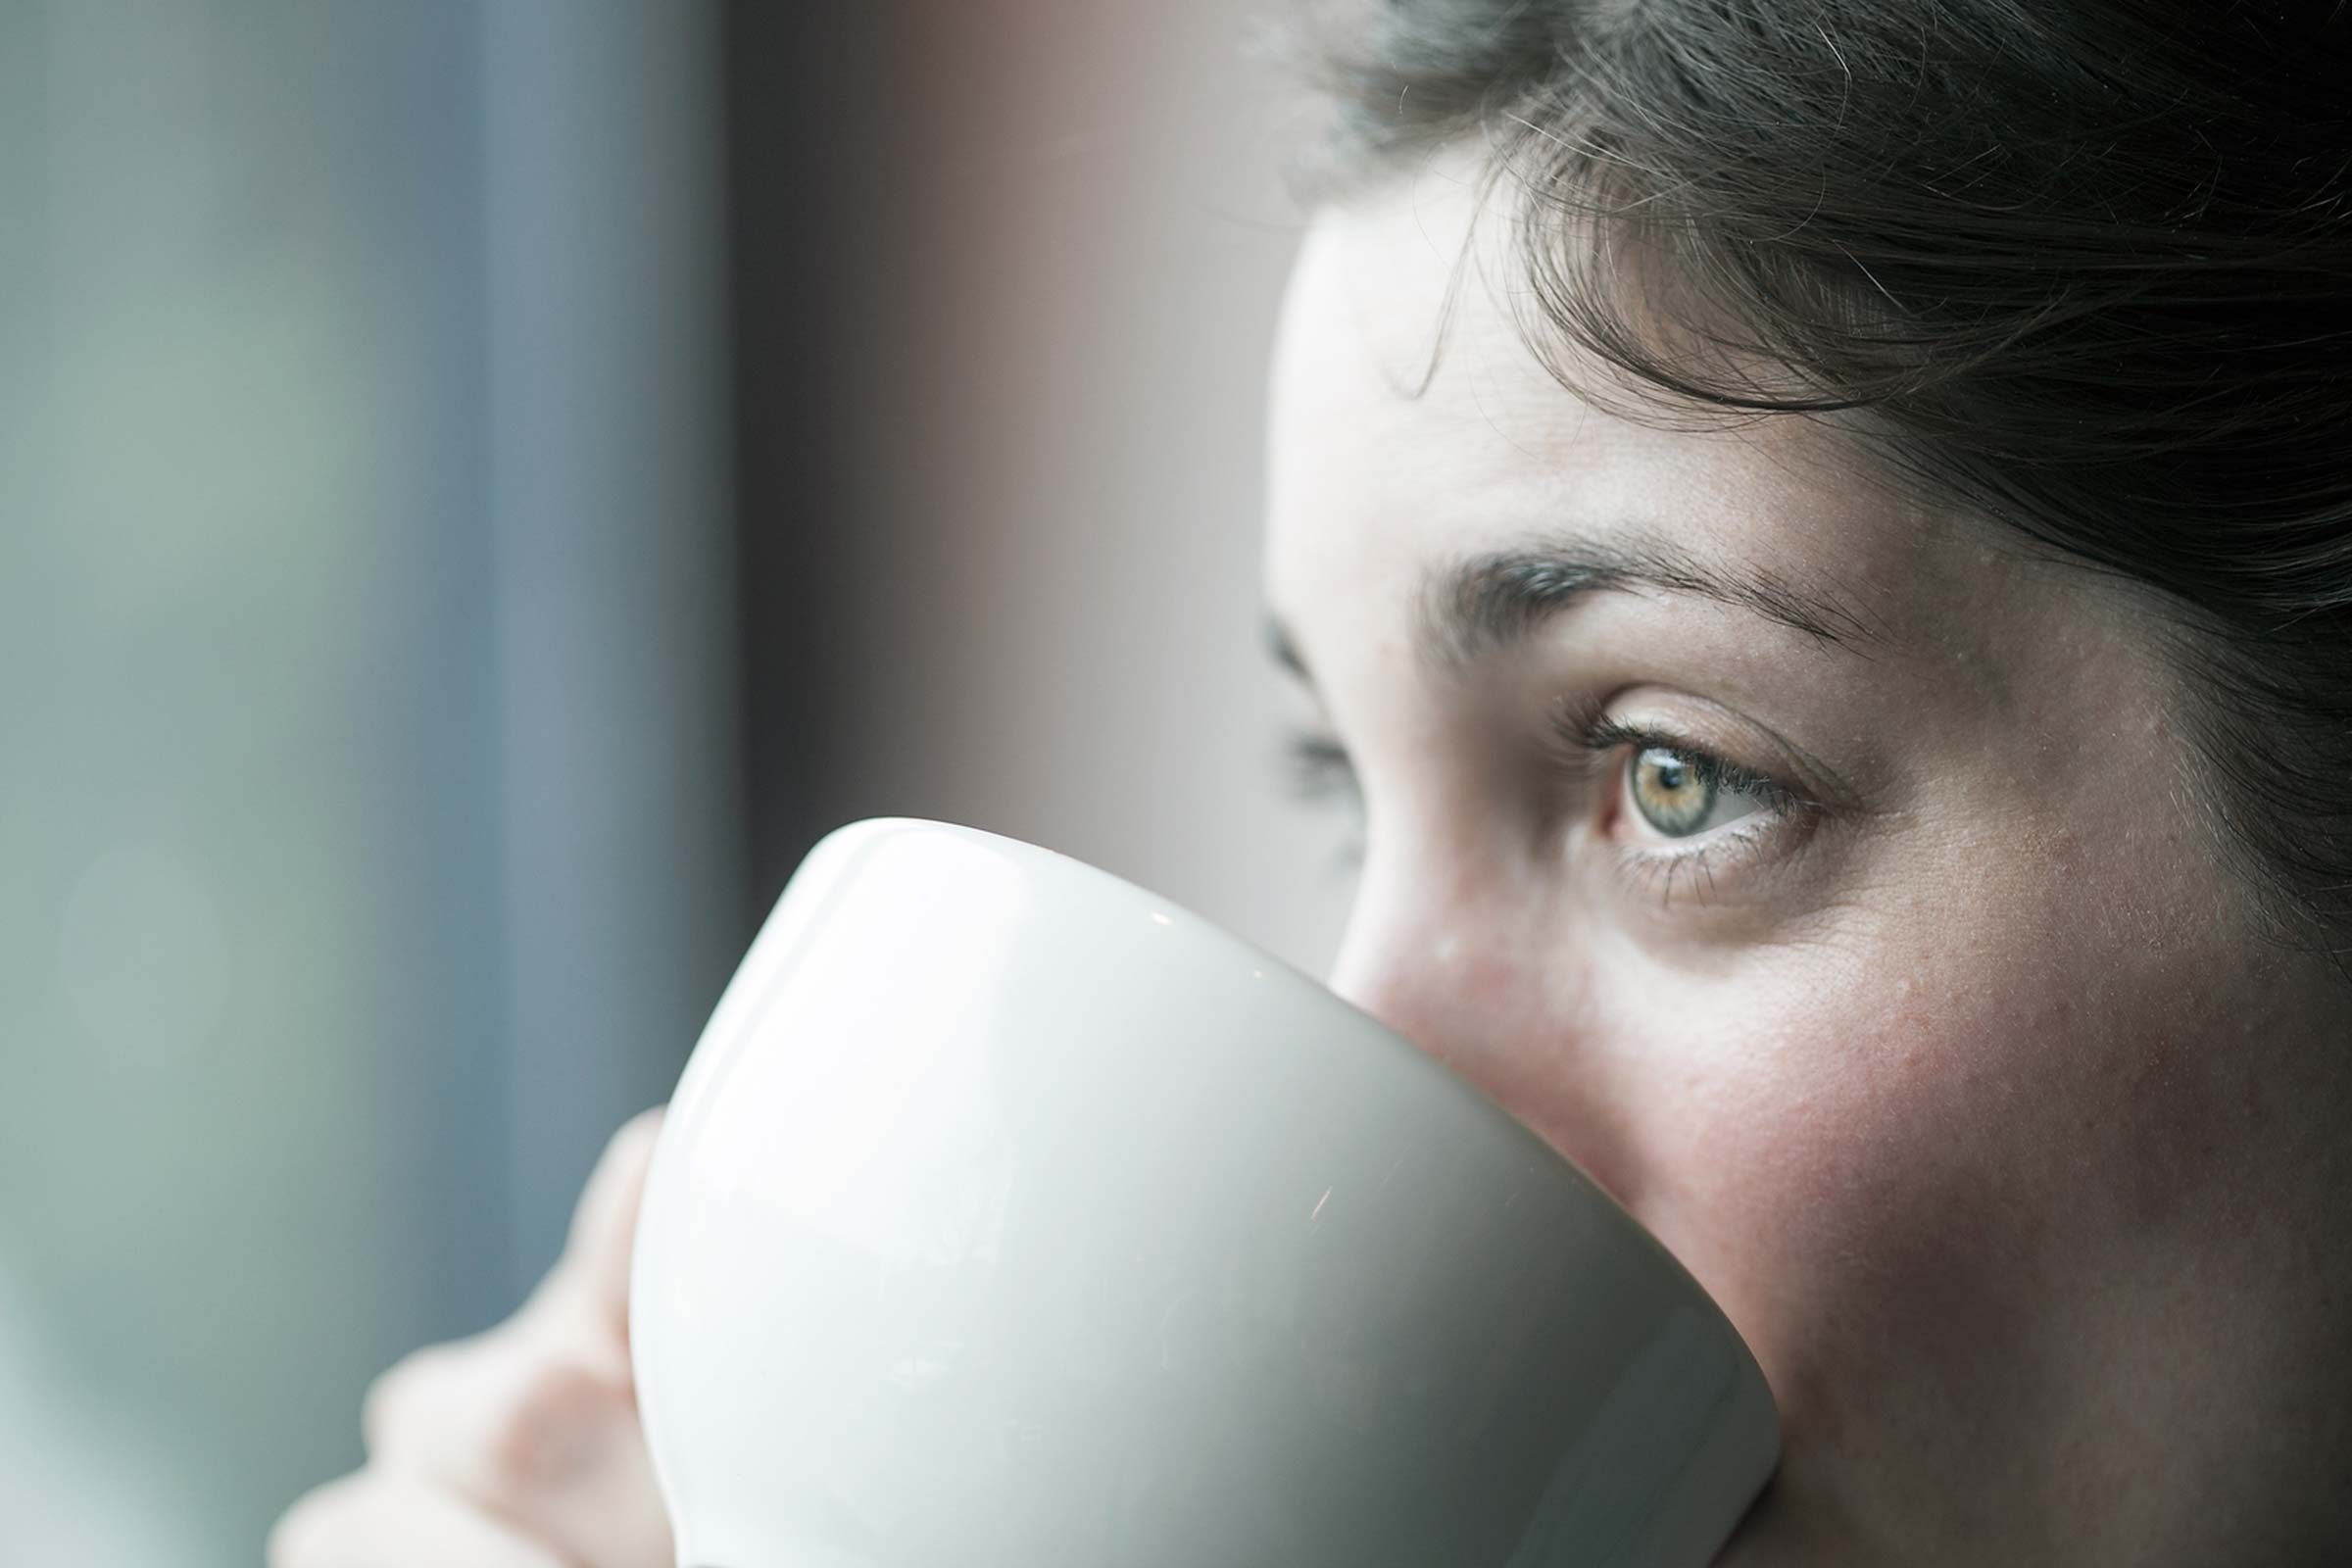 Woman with pale complexion sipping from a mug.